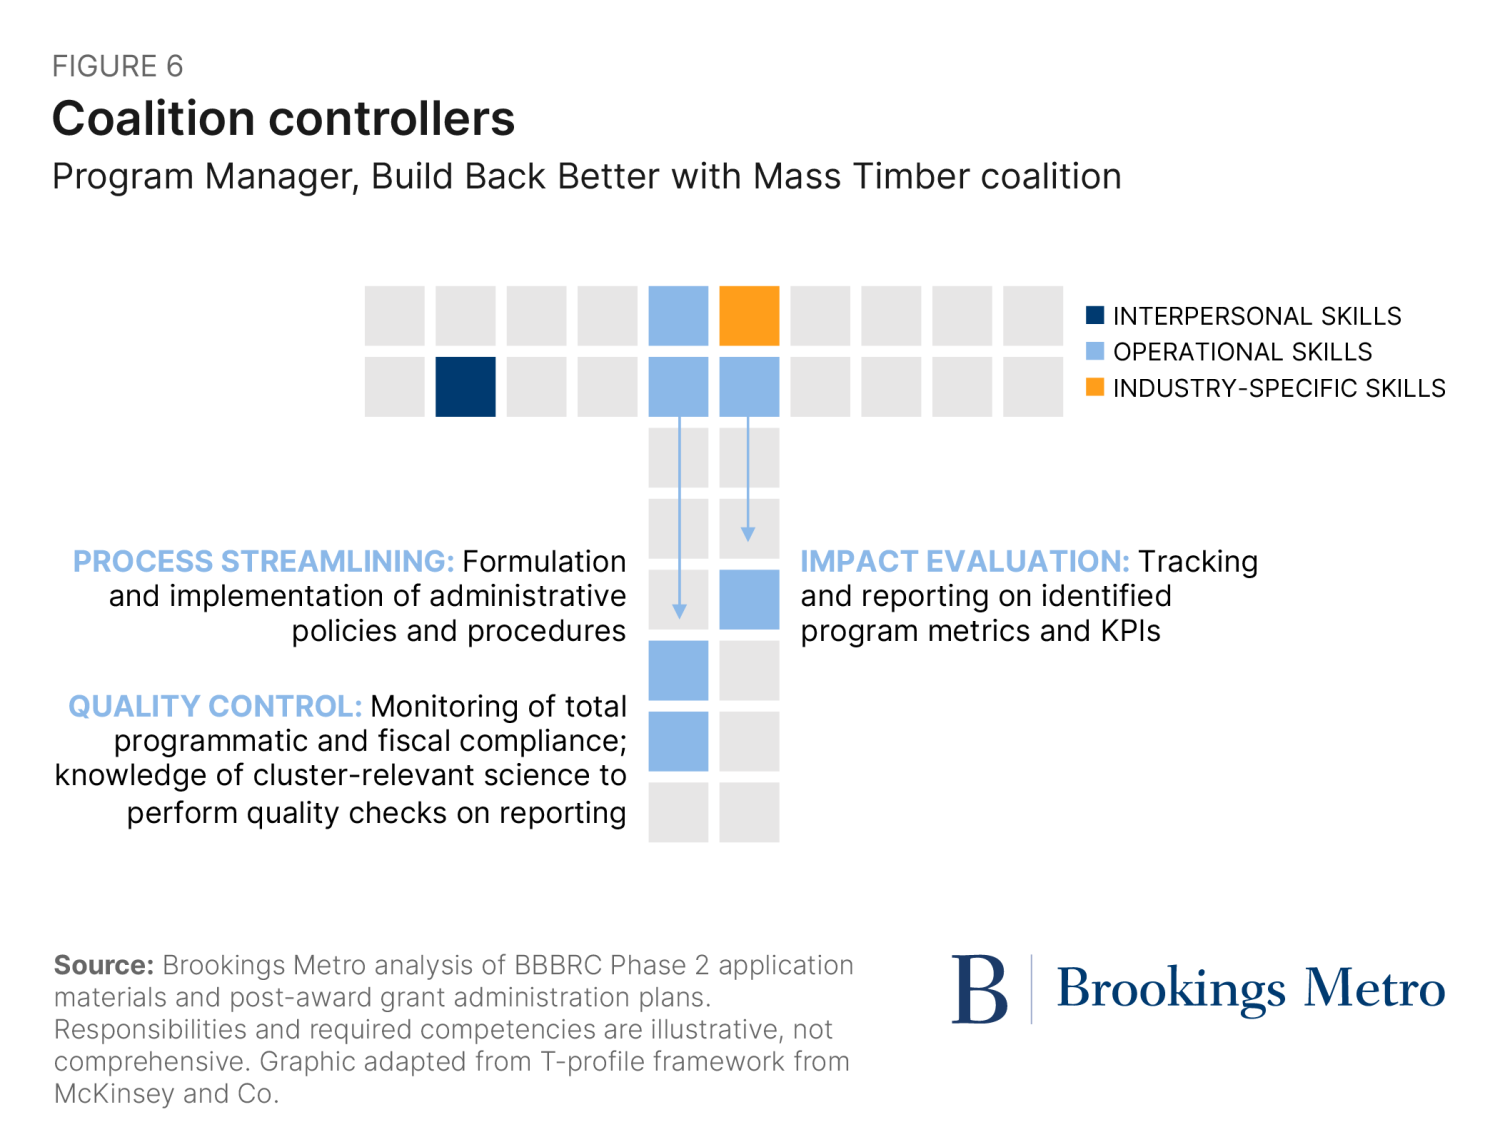 Figure 6. COALITION CONTROLLERS Program Manager, Build Back Better with Mass Timber coalition